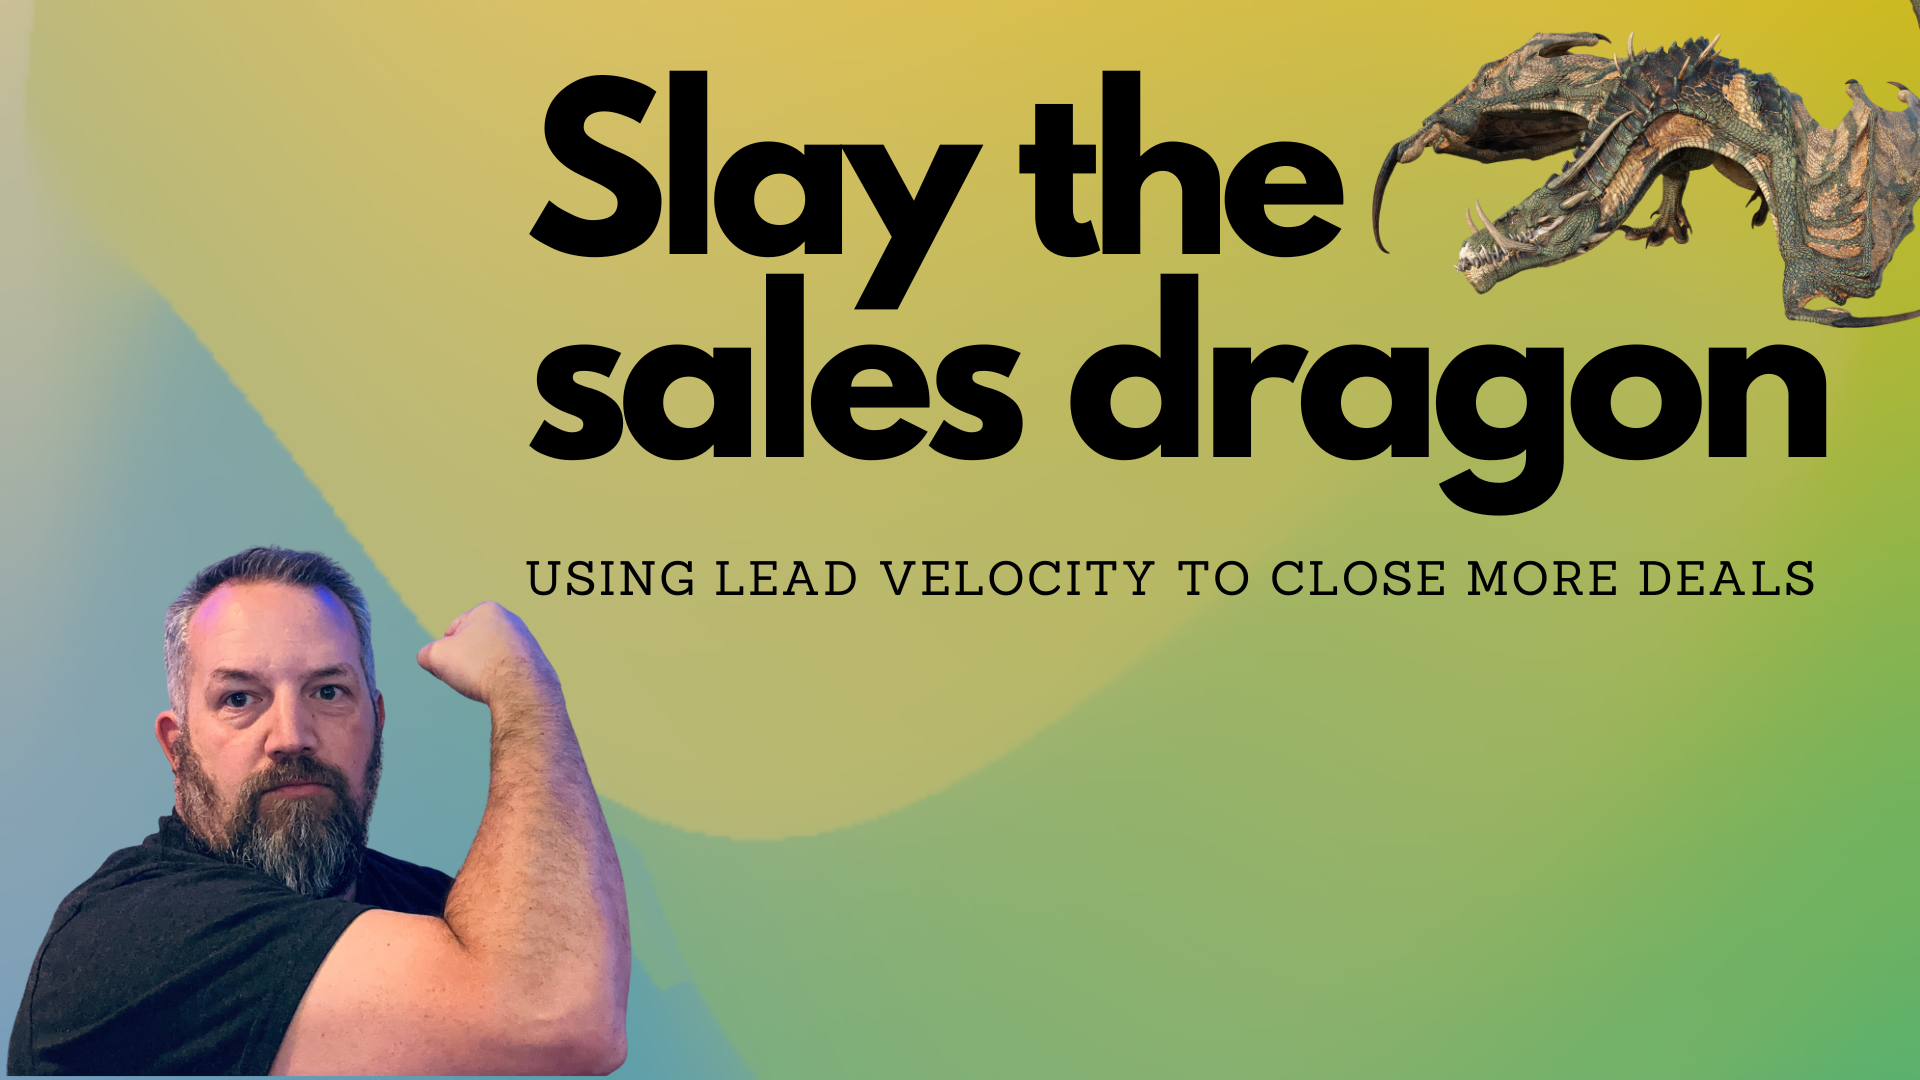 slay the sales dragon, using lead velocity to close more deals